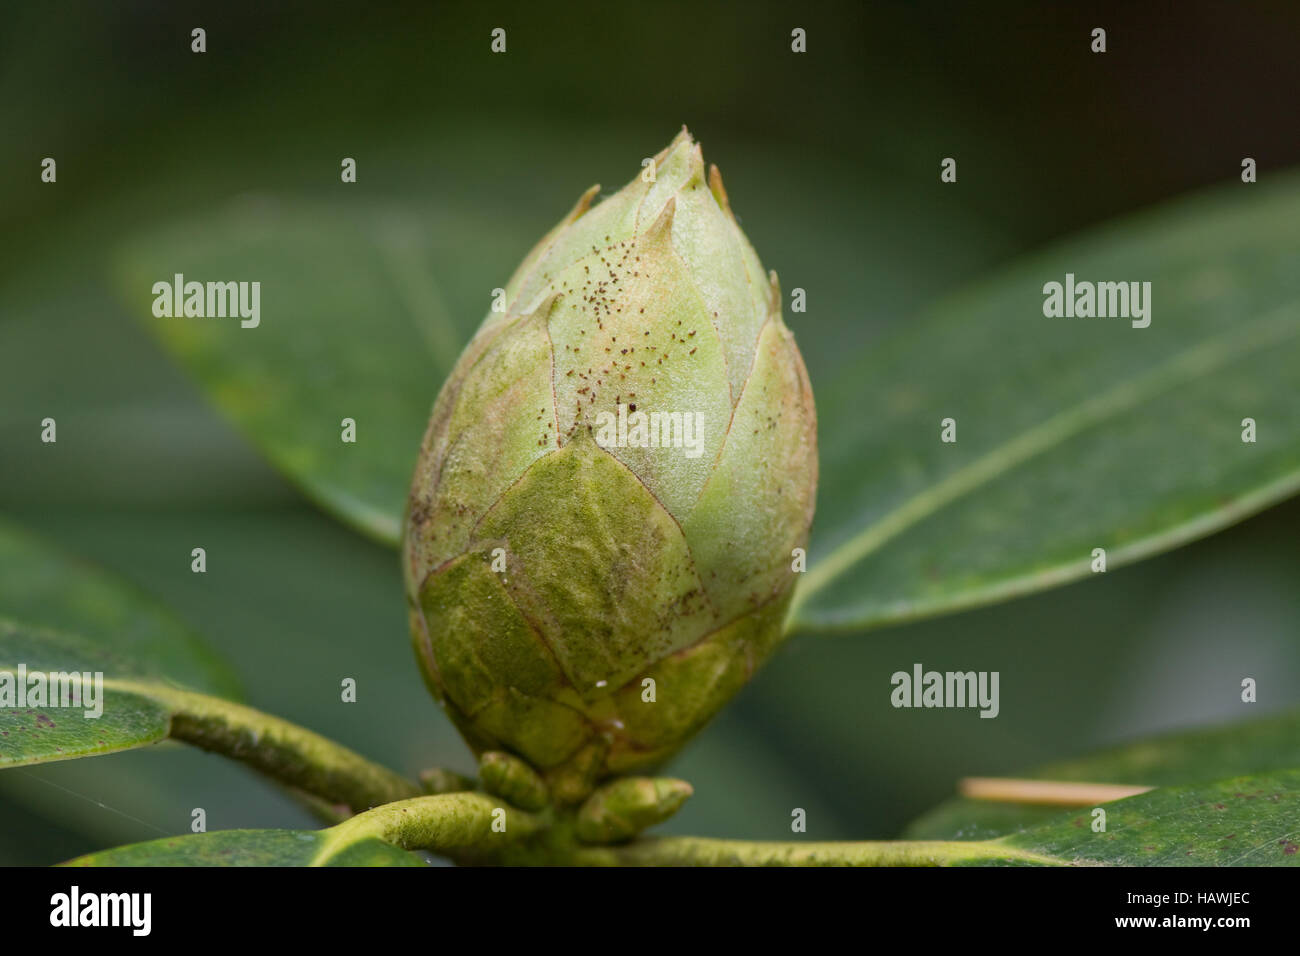 rhododendron bud Stock Photo